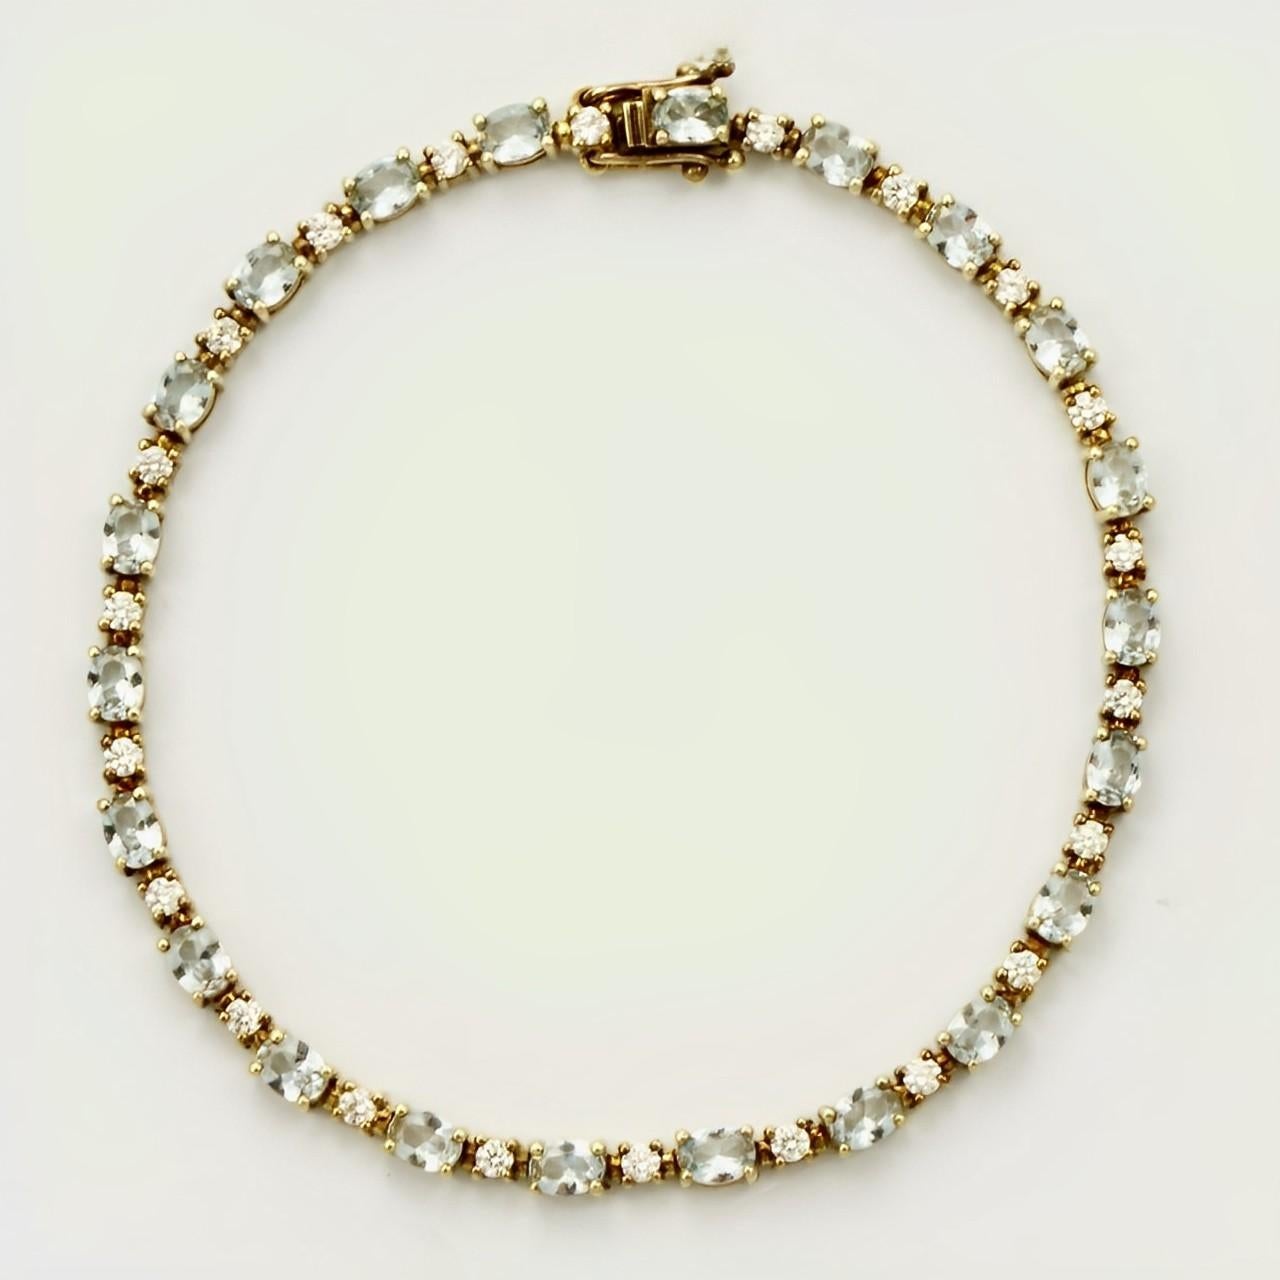 Beautiful gold vermeil on sterling silver tennis bracelet with a double safety catch, set with oval pale blue and round clear faceted cubic zirconias in open back settings. Measuring length 17.6 cm / 6.9 inches by width 3 mm / .11 inch, and depth